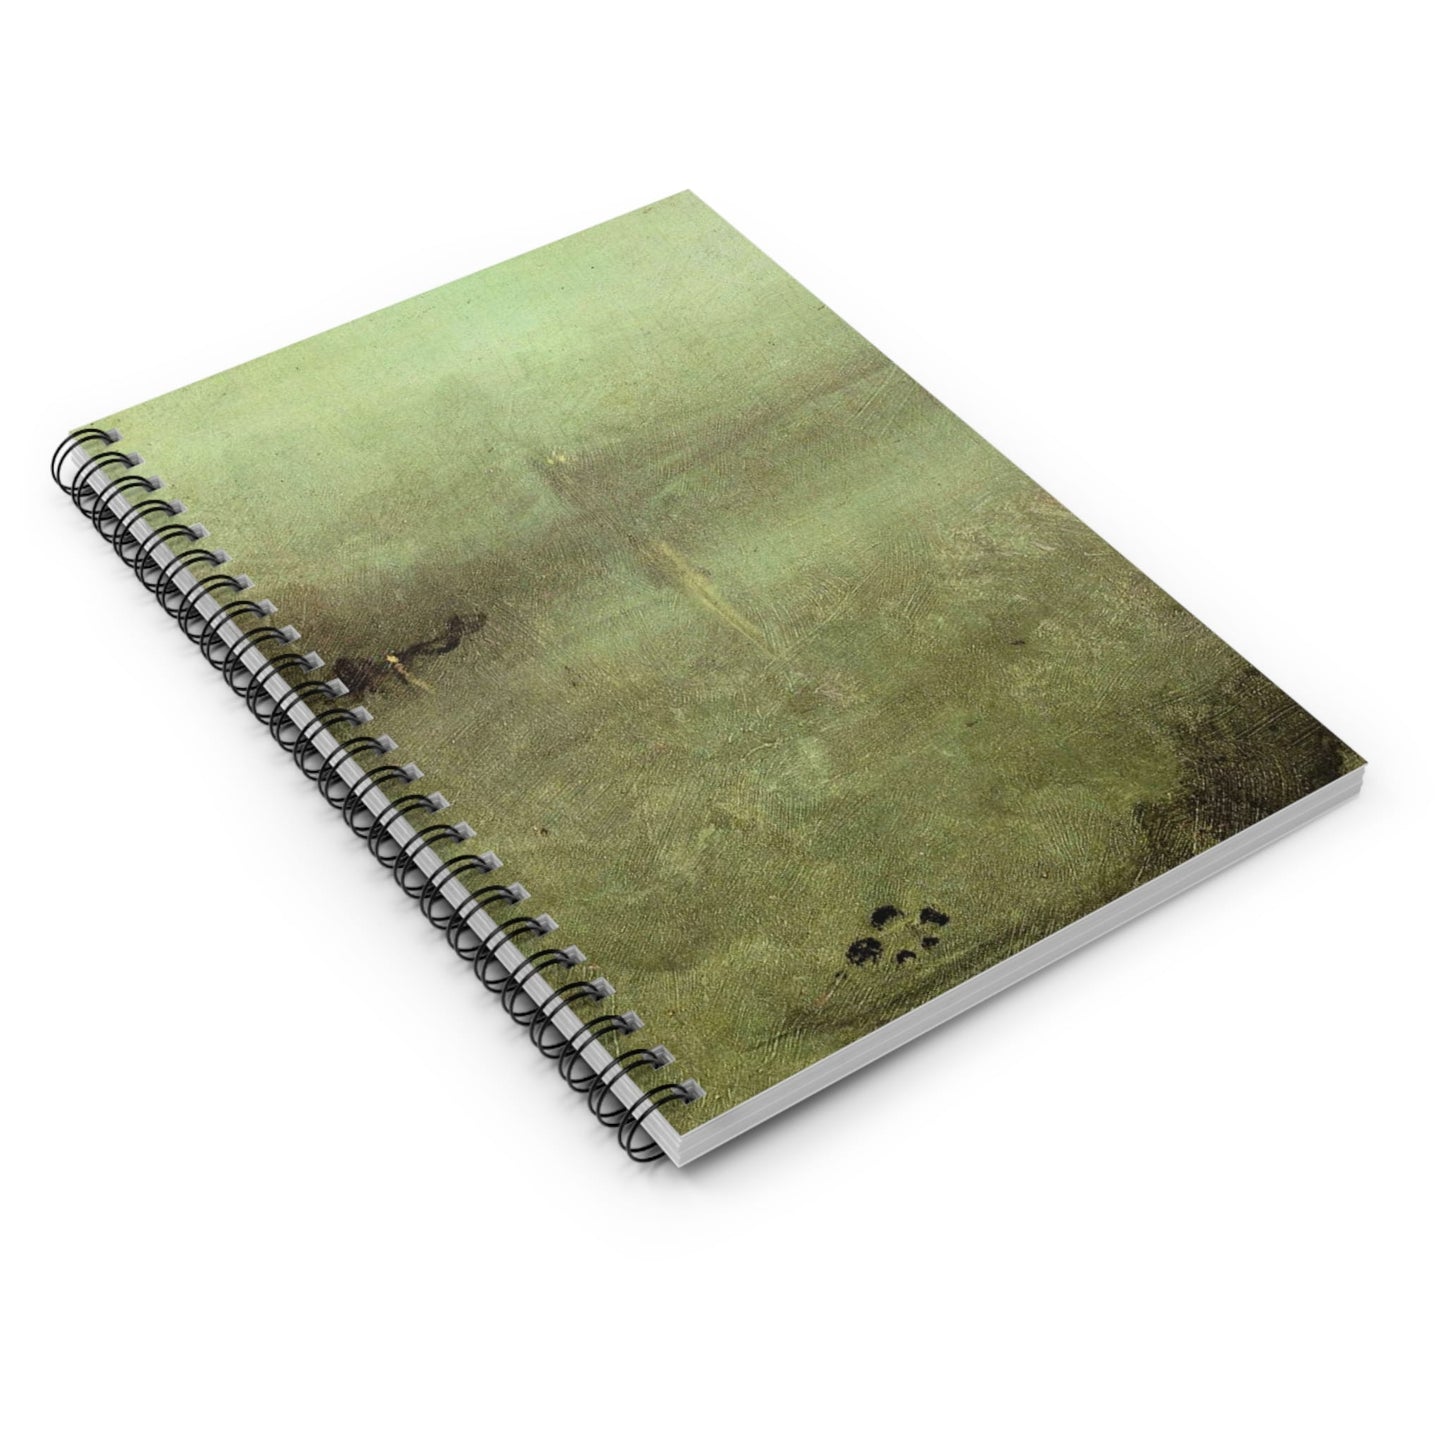 Abstract Green Painting Spiral Notebook Laying Flat on White Surface